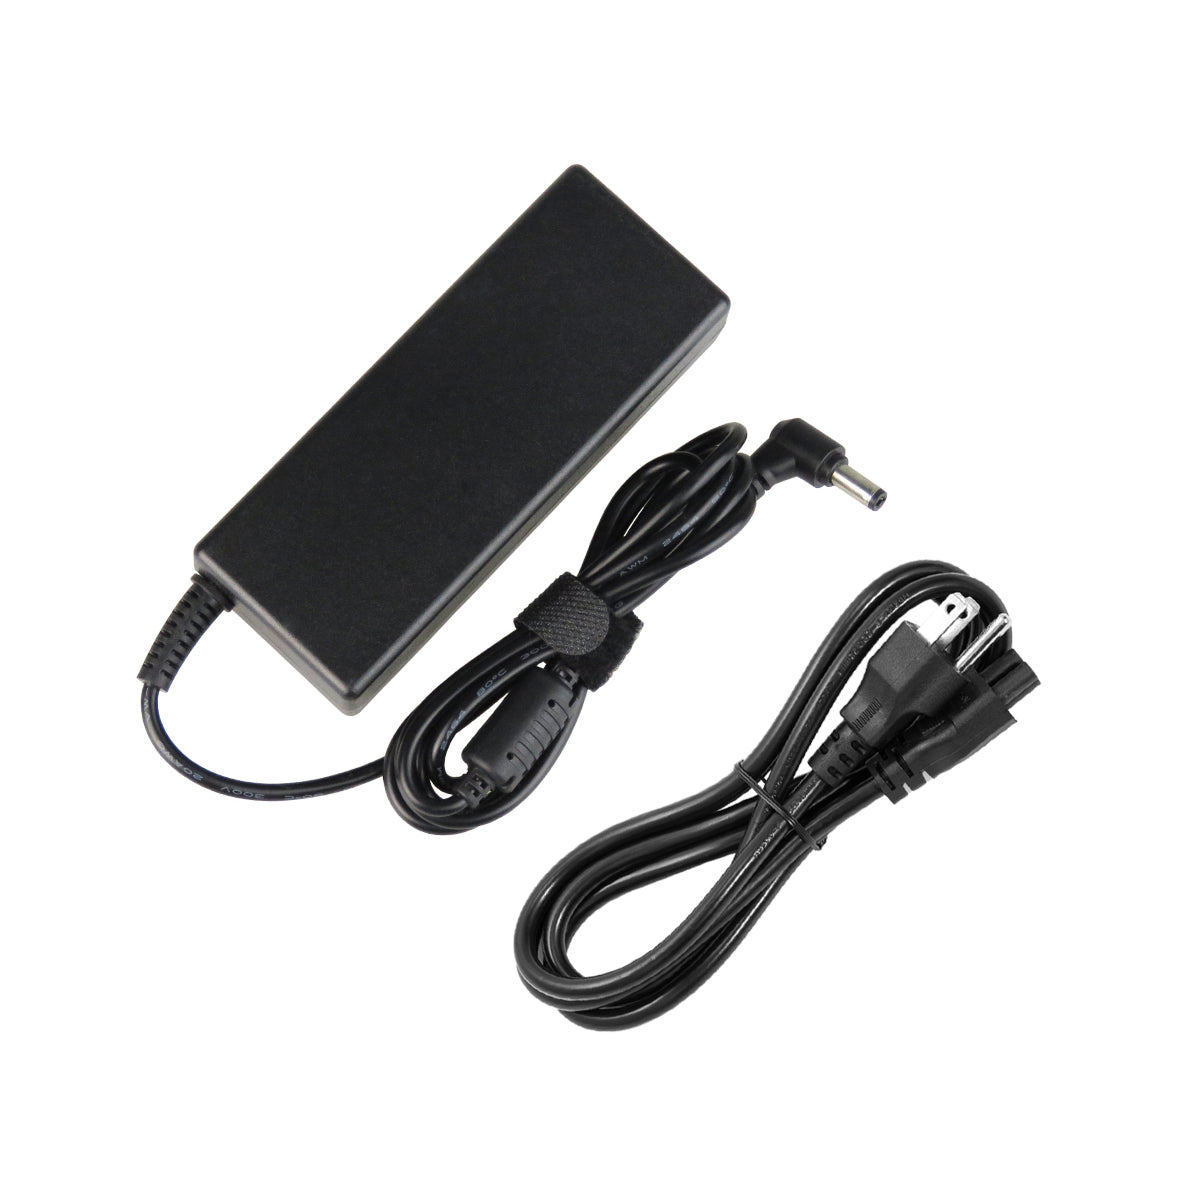 AC Adapter Charger for ASUS u2e Series Notebook.